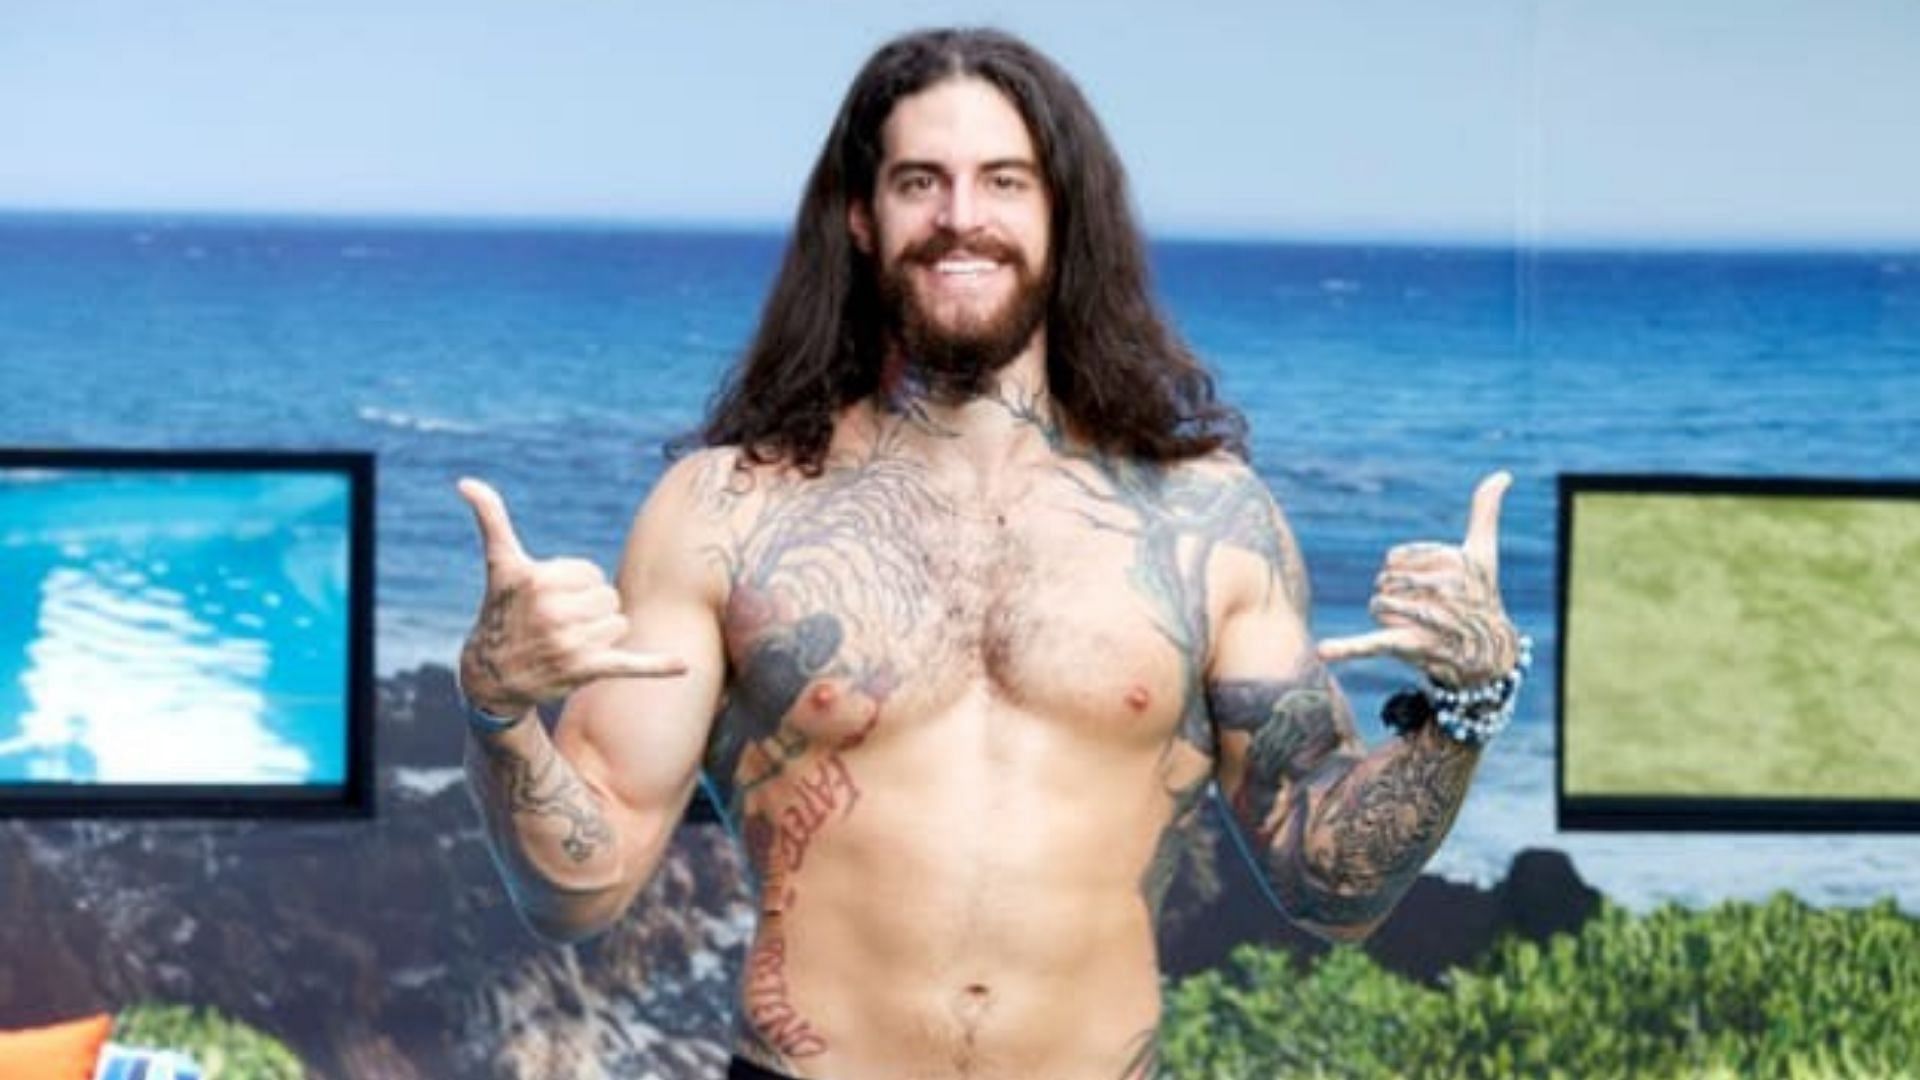 Luchasaurus (Austin Matelson) competing on Big Brother without a mask